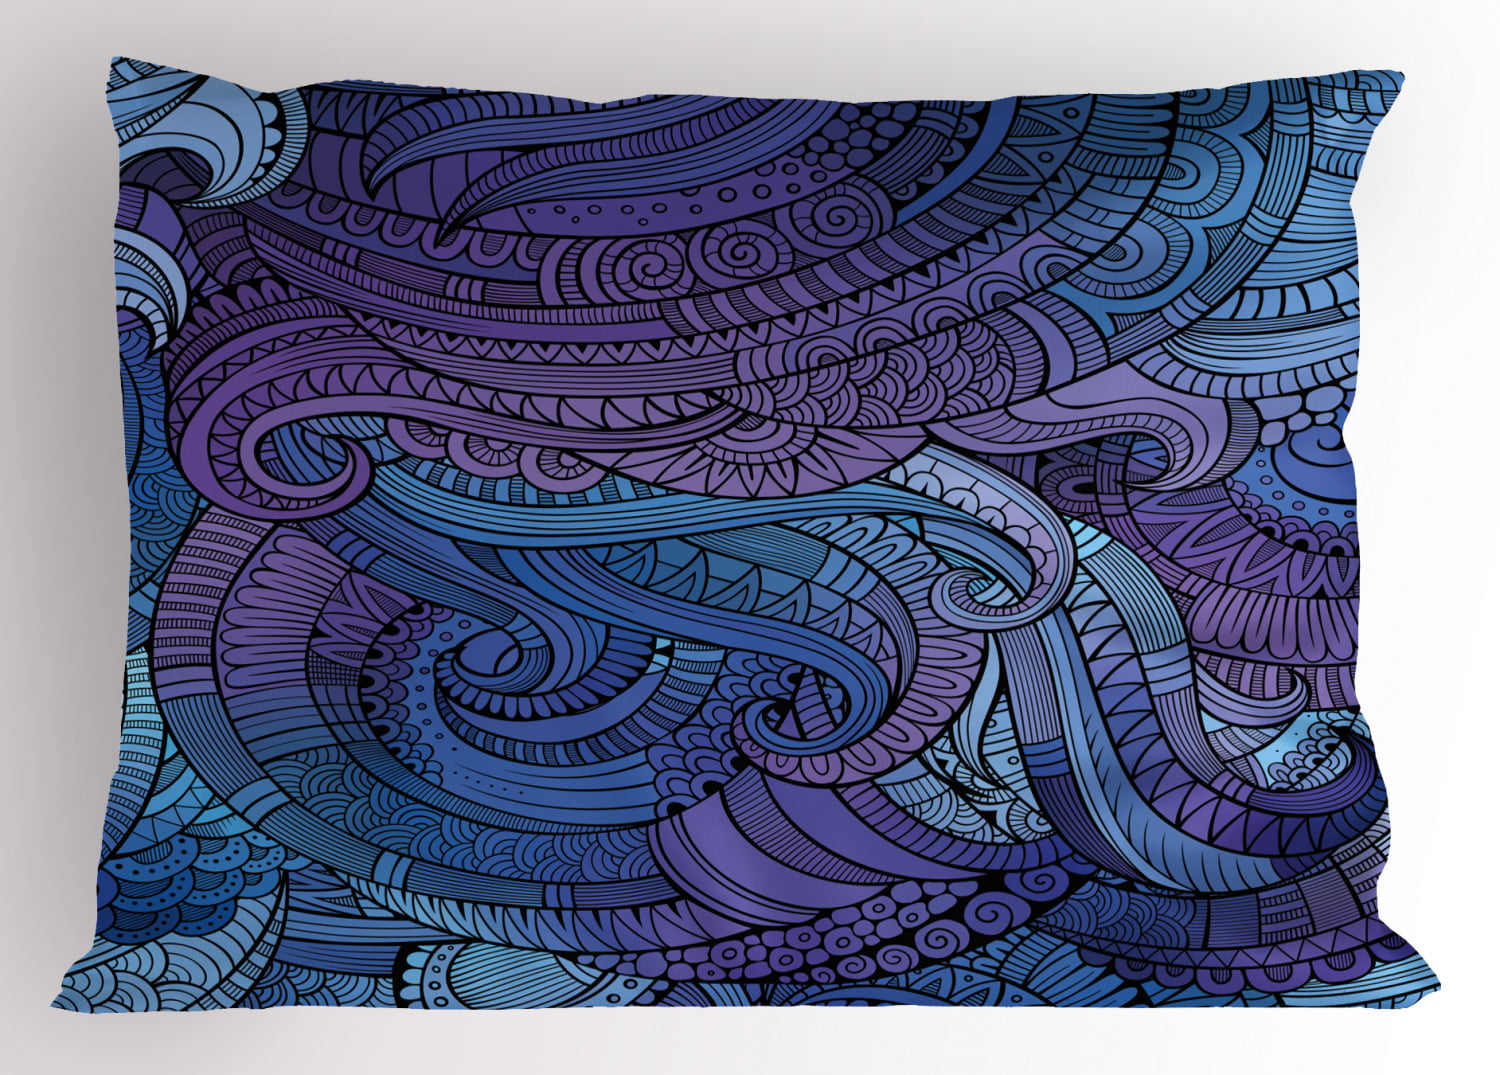 Abstract Pillow Sham Ocean Inspired Graphic Arabesque Paisley Swirled Hand  Drawn Ethnic Artwork Print, Decorative Standard King Size Printed  Pillowcase, 36 X 20 Inches, Purple Blue, by Ambesonne